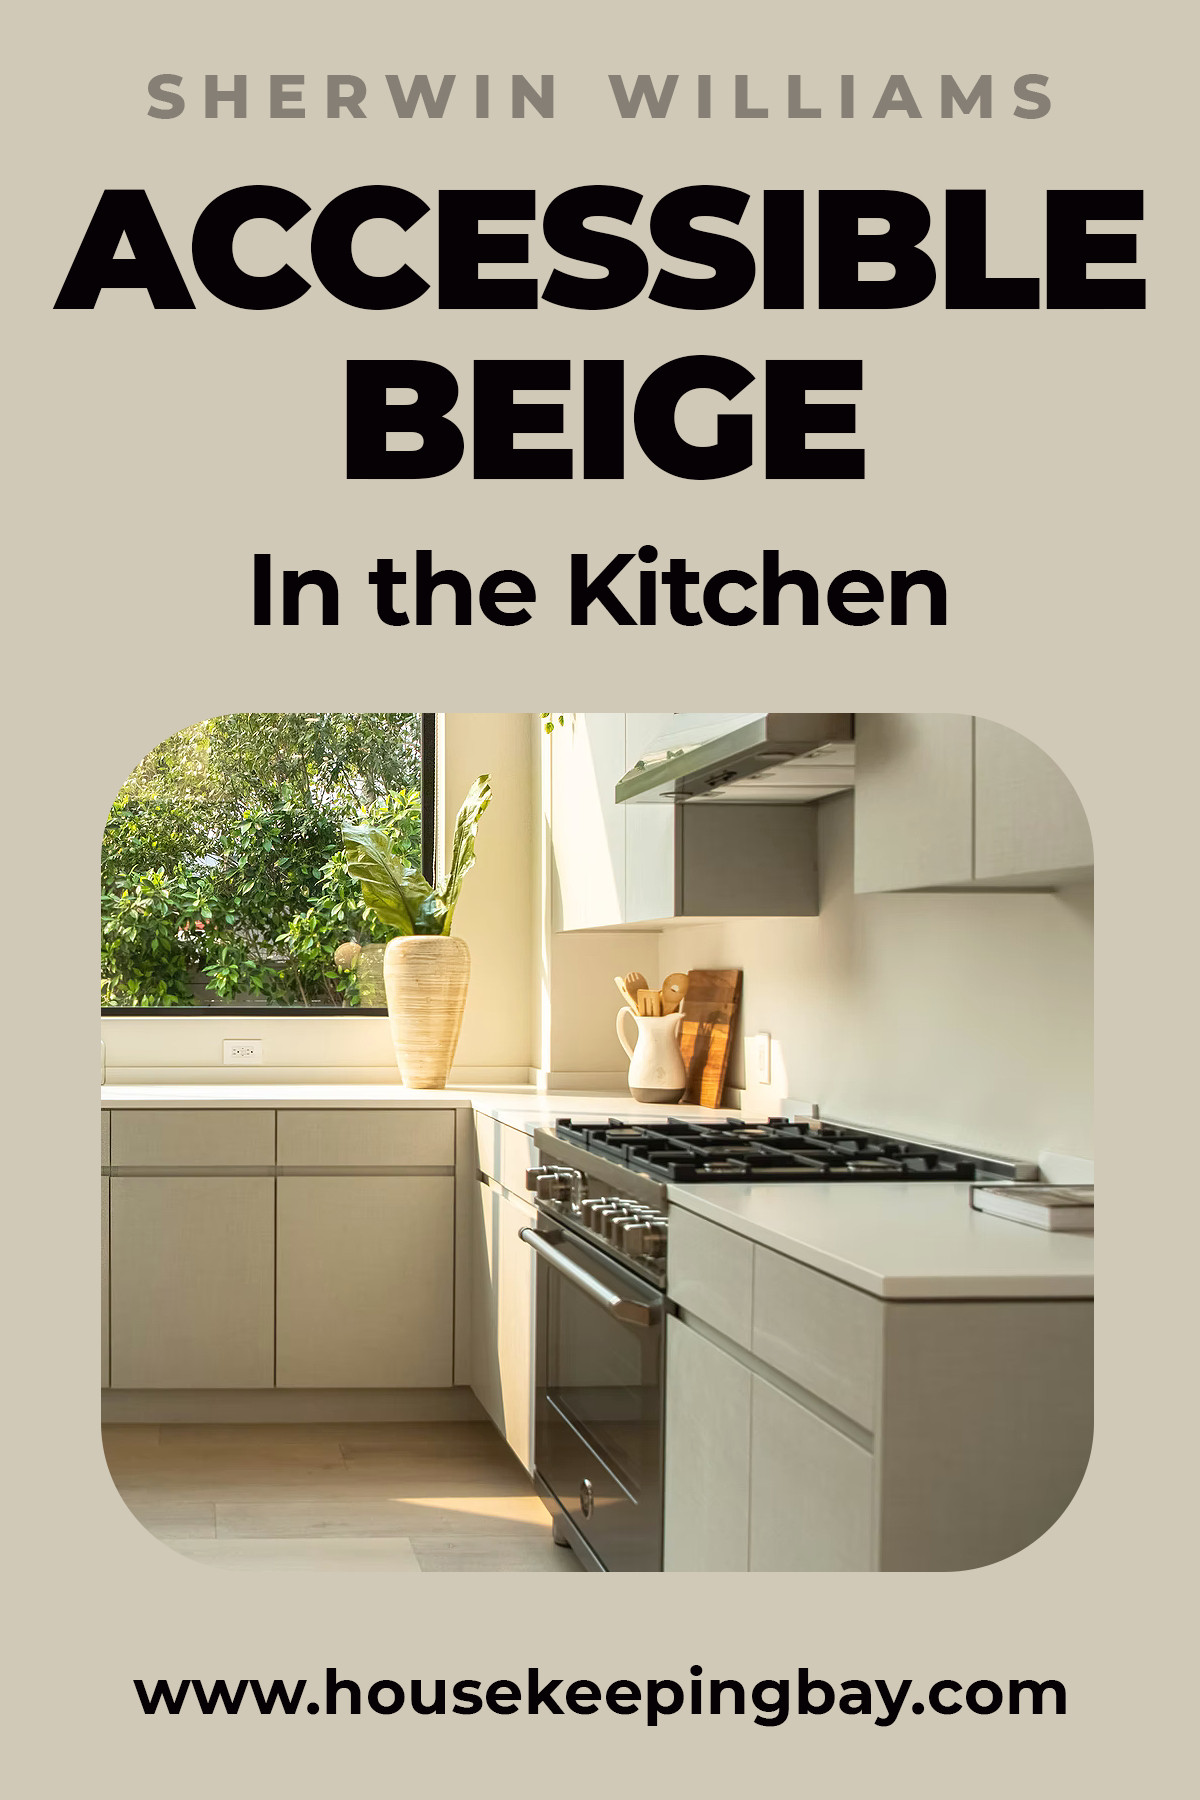 Accessible Beige in the Kitchen